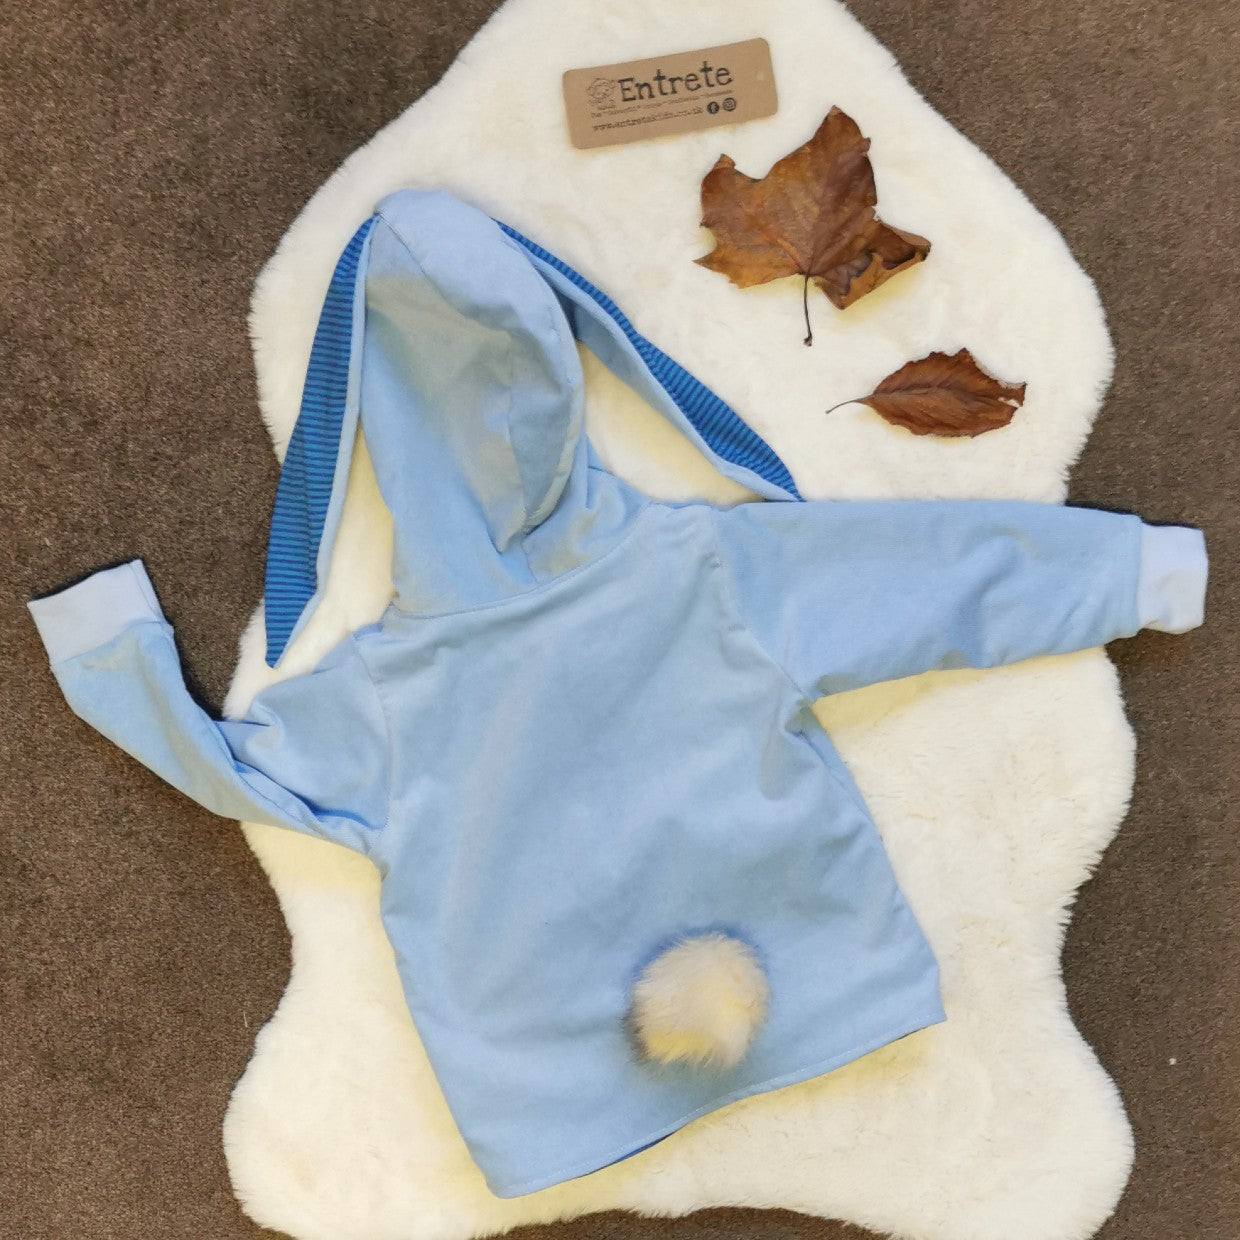 Back of blue bunny coat showing bunny ears on the hood and pom pom bunny tail.